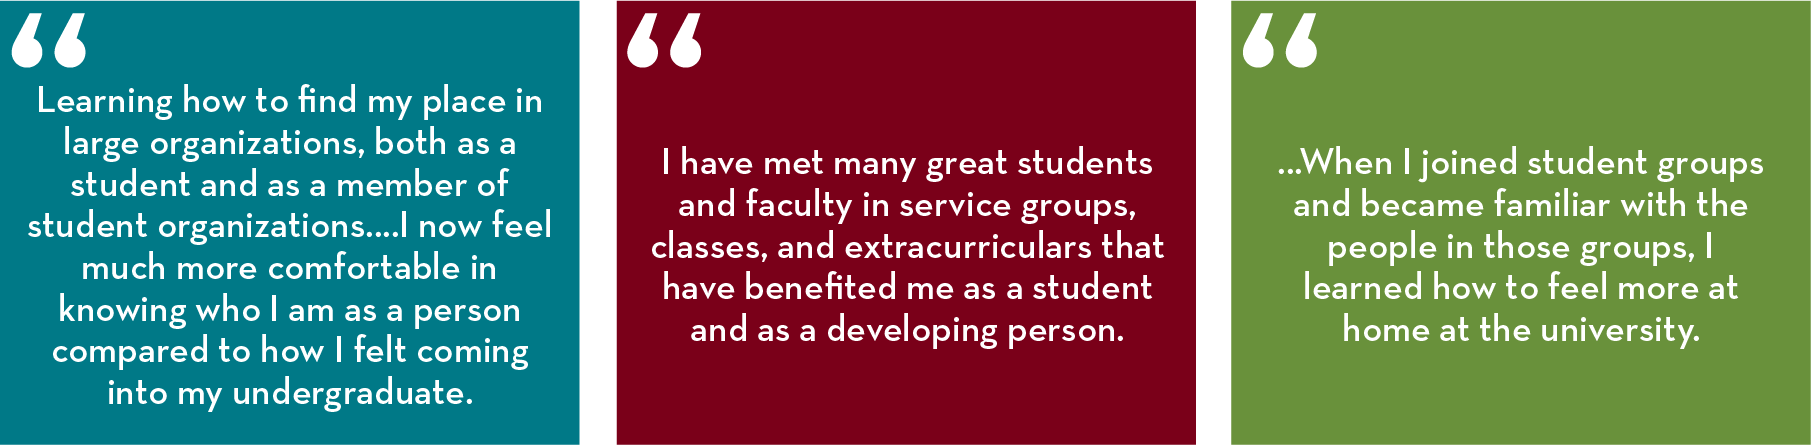 “Learning how to find my place in large organizations, both as a student and as a member of student organizations...I now feel much more comfortable in knowing who I am as a person compared to how I felt coming into my undergraduate.” “I have met many gre